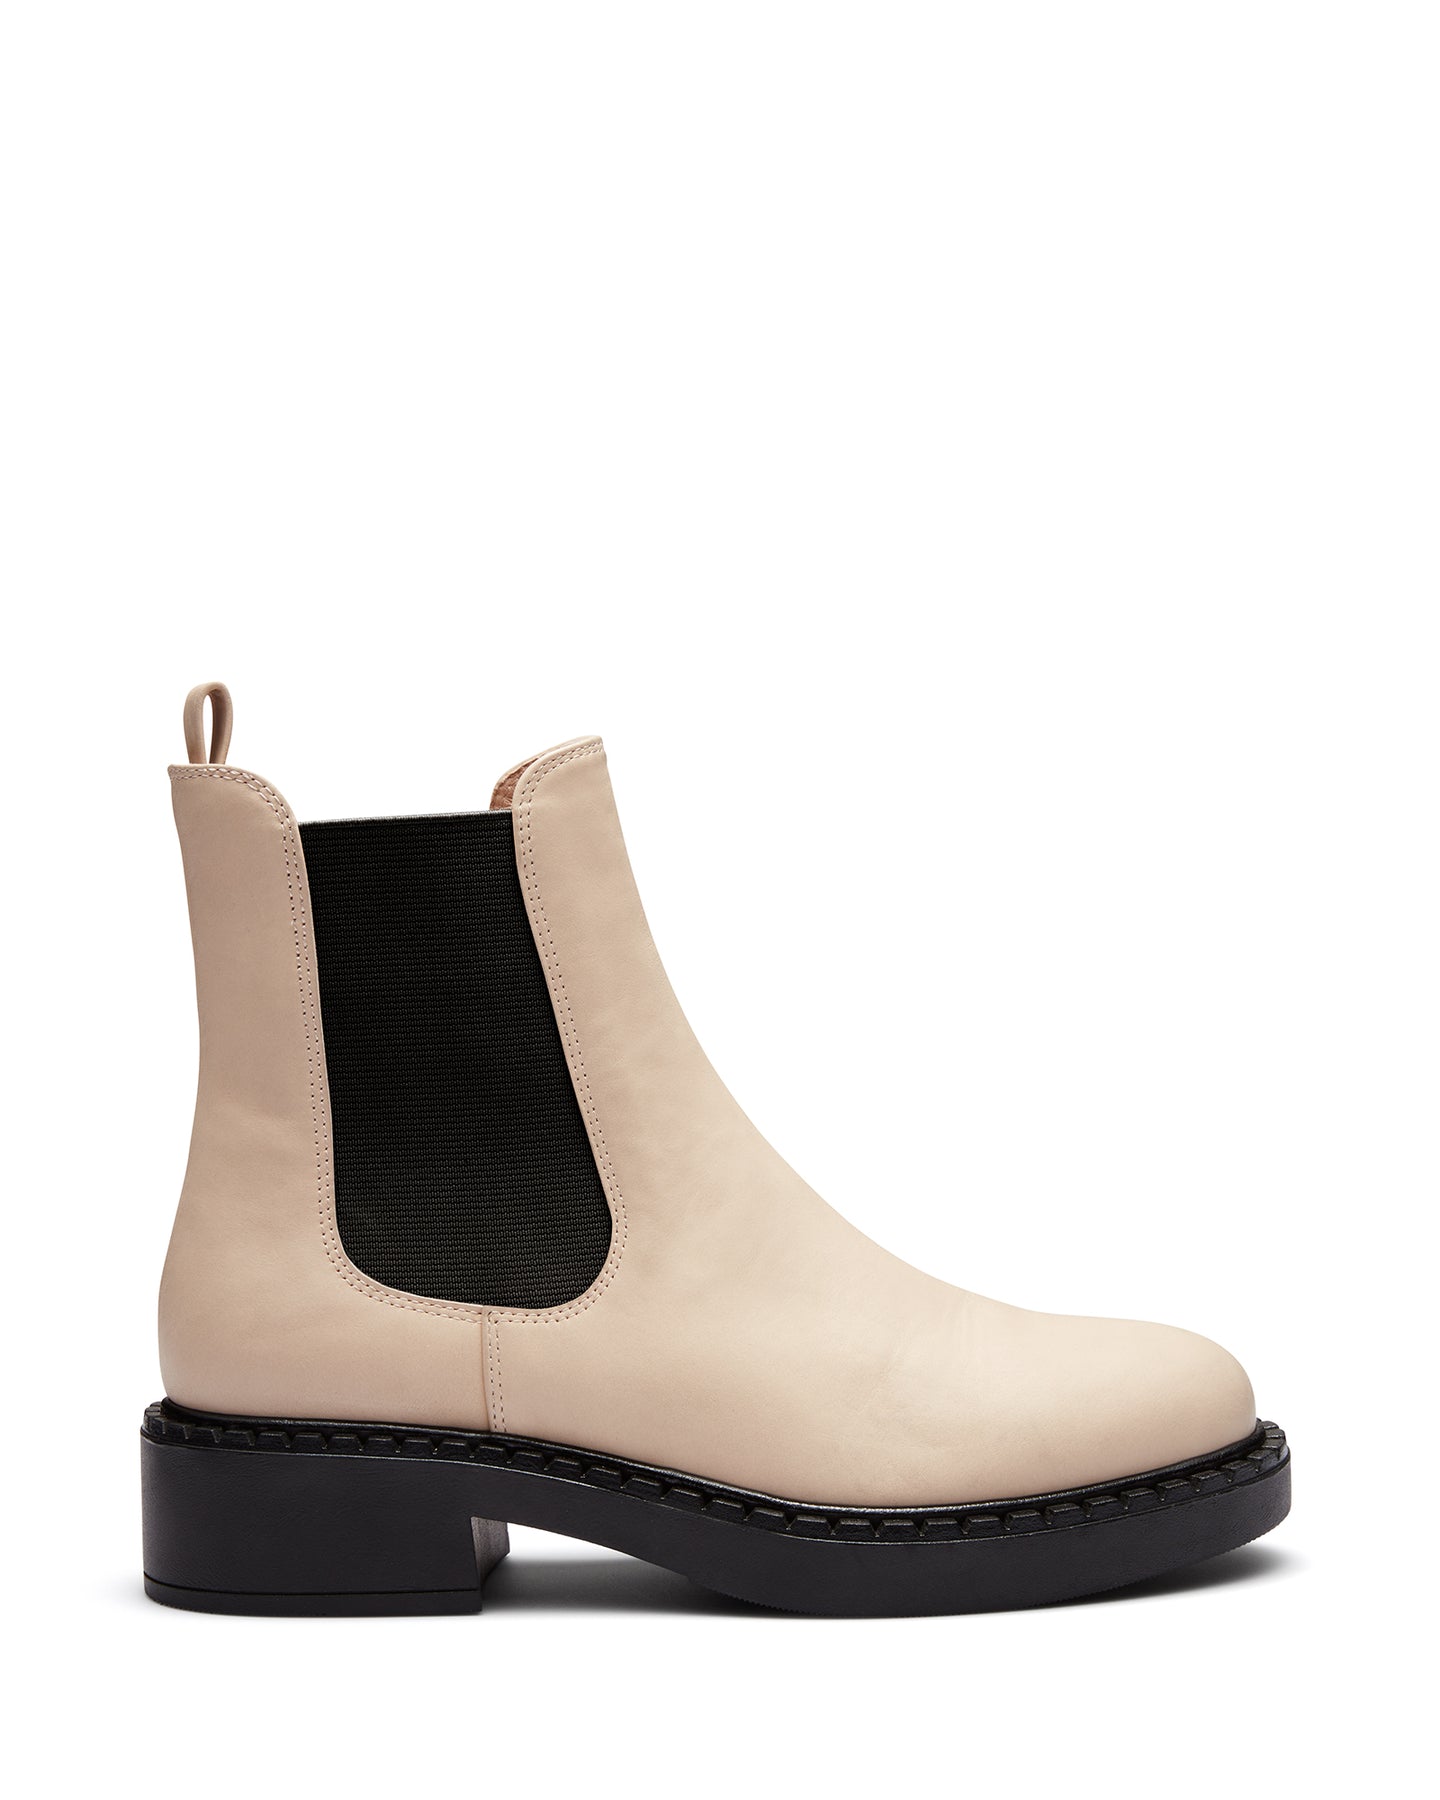 Just Because Shoes Arbury Bone | Women's Leather Boot | Chelsea | Ankle